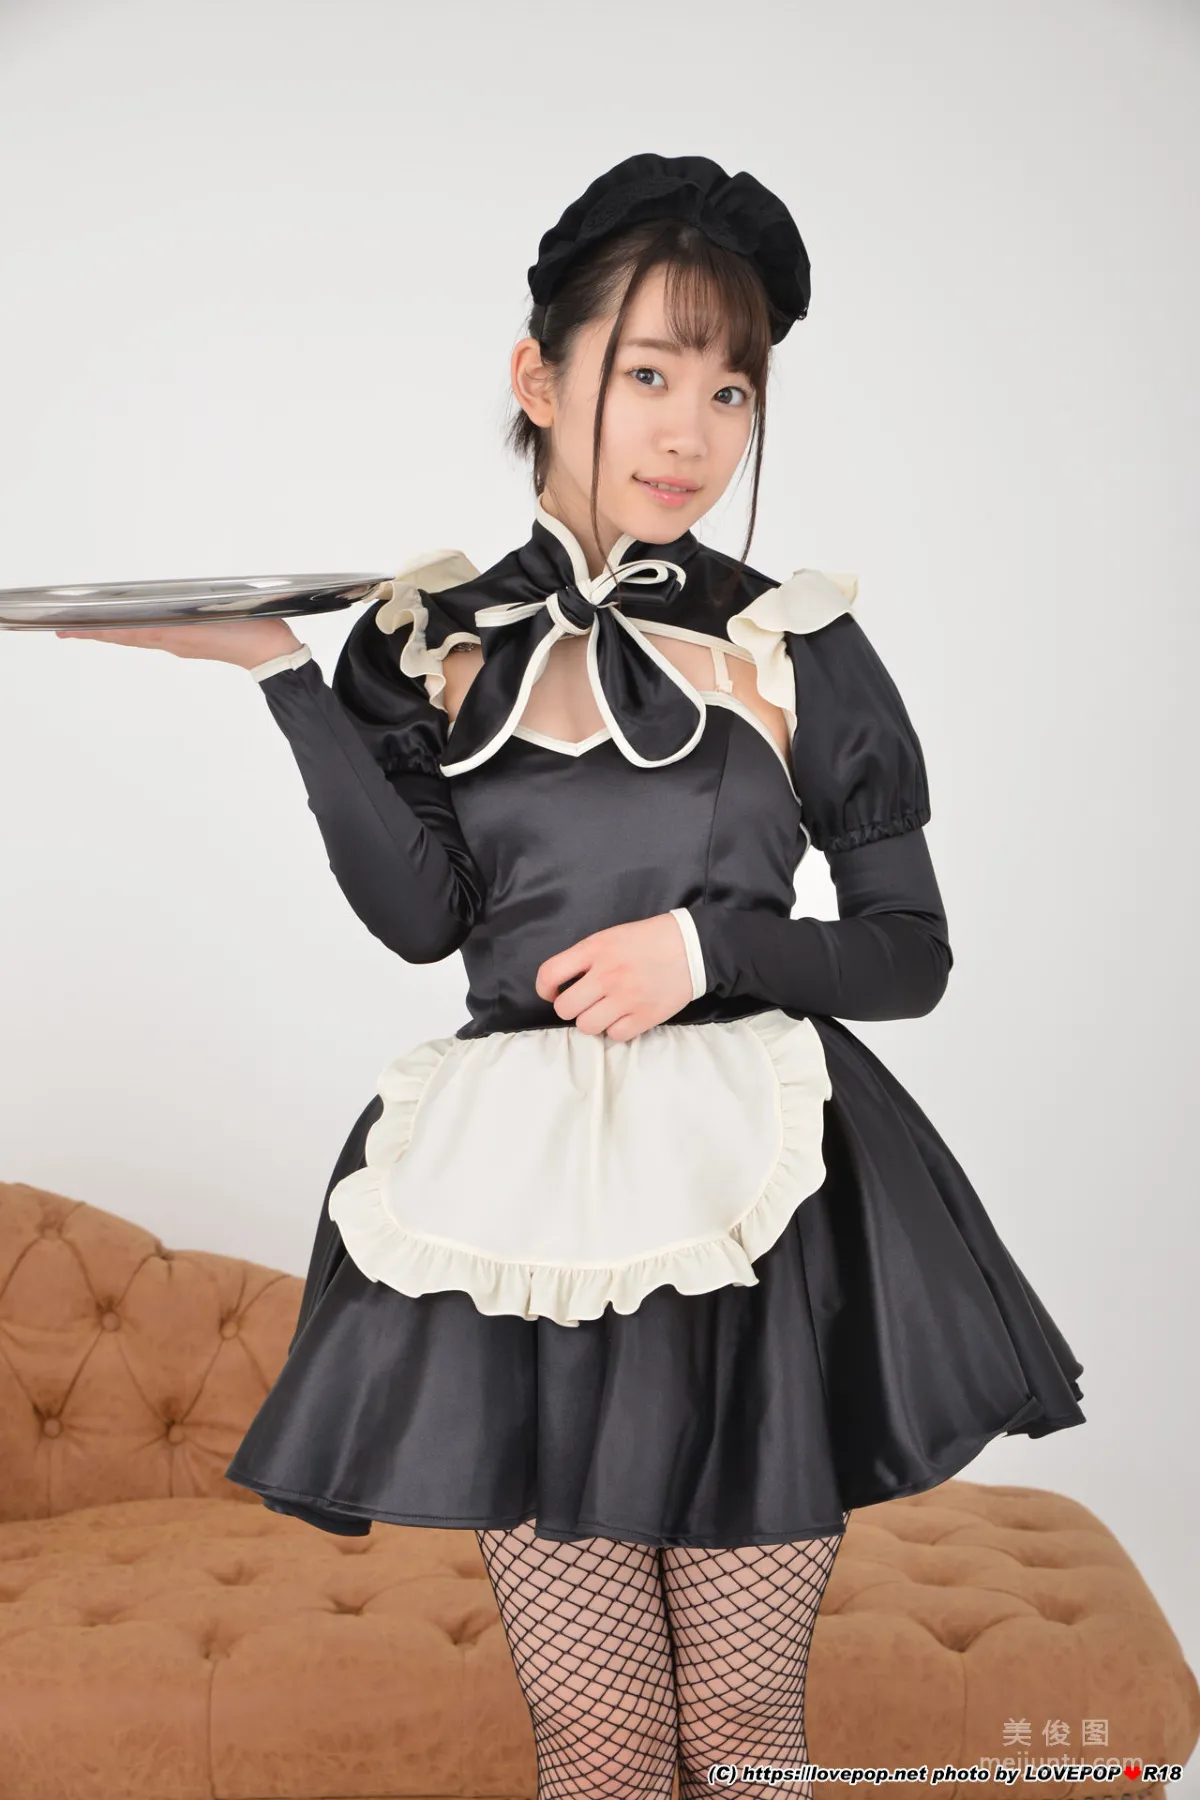 [LOVEPOP] Special Maid Collection - 架乃ゆら Photoset 022